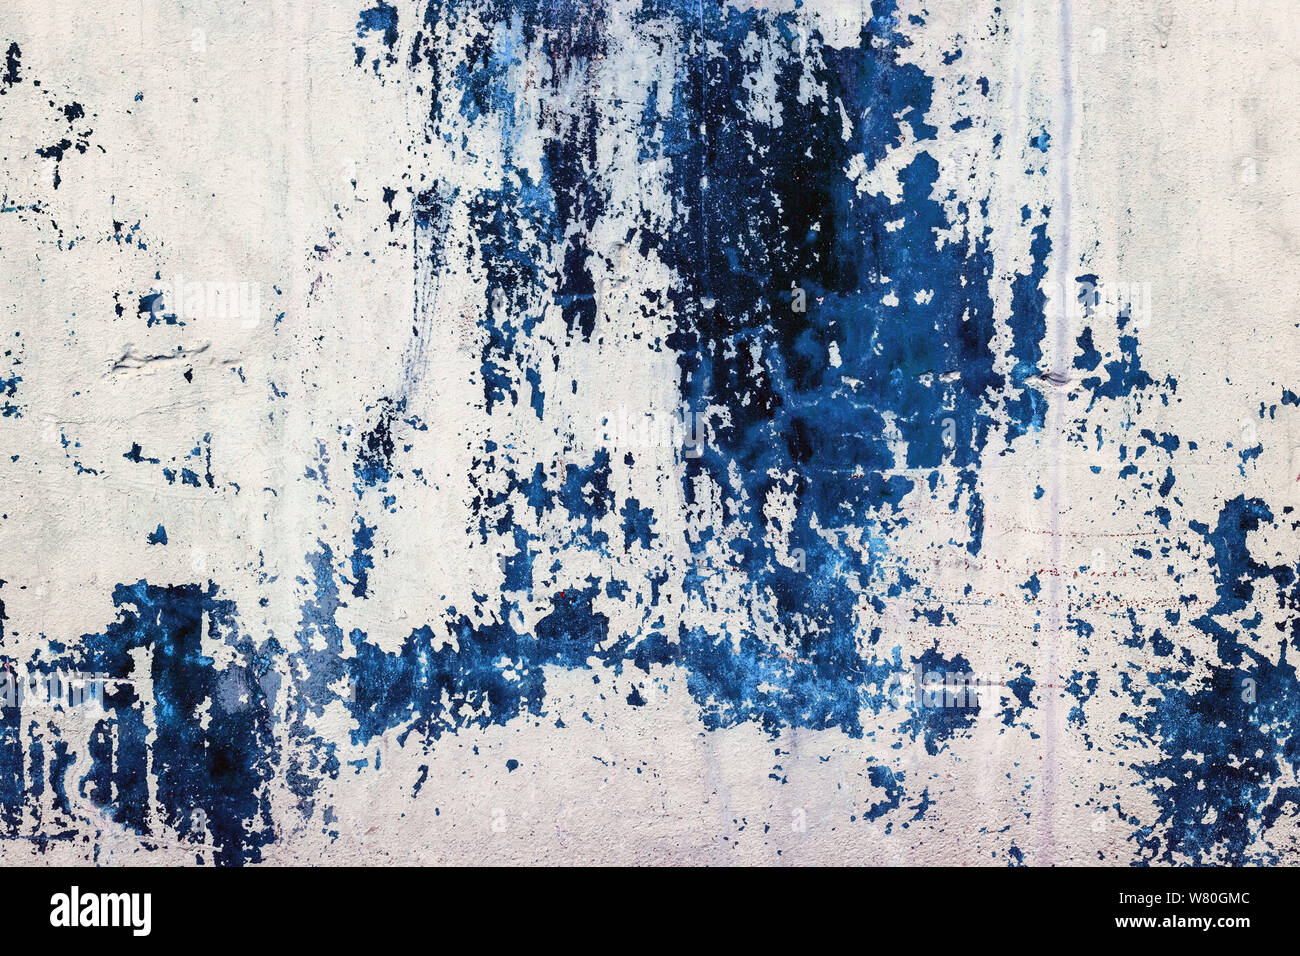 Old Concrete Wall Stained With Blue Paint Design Texture